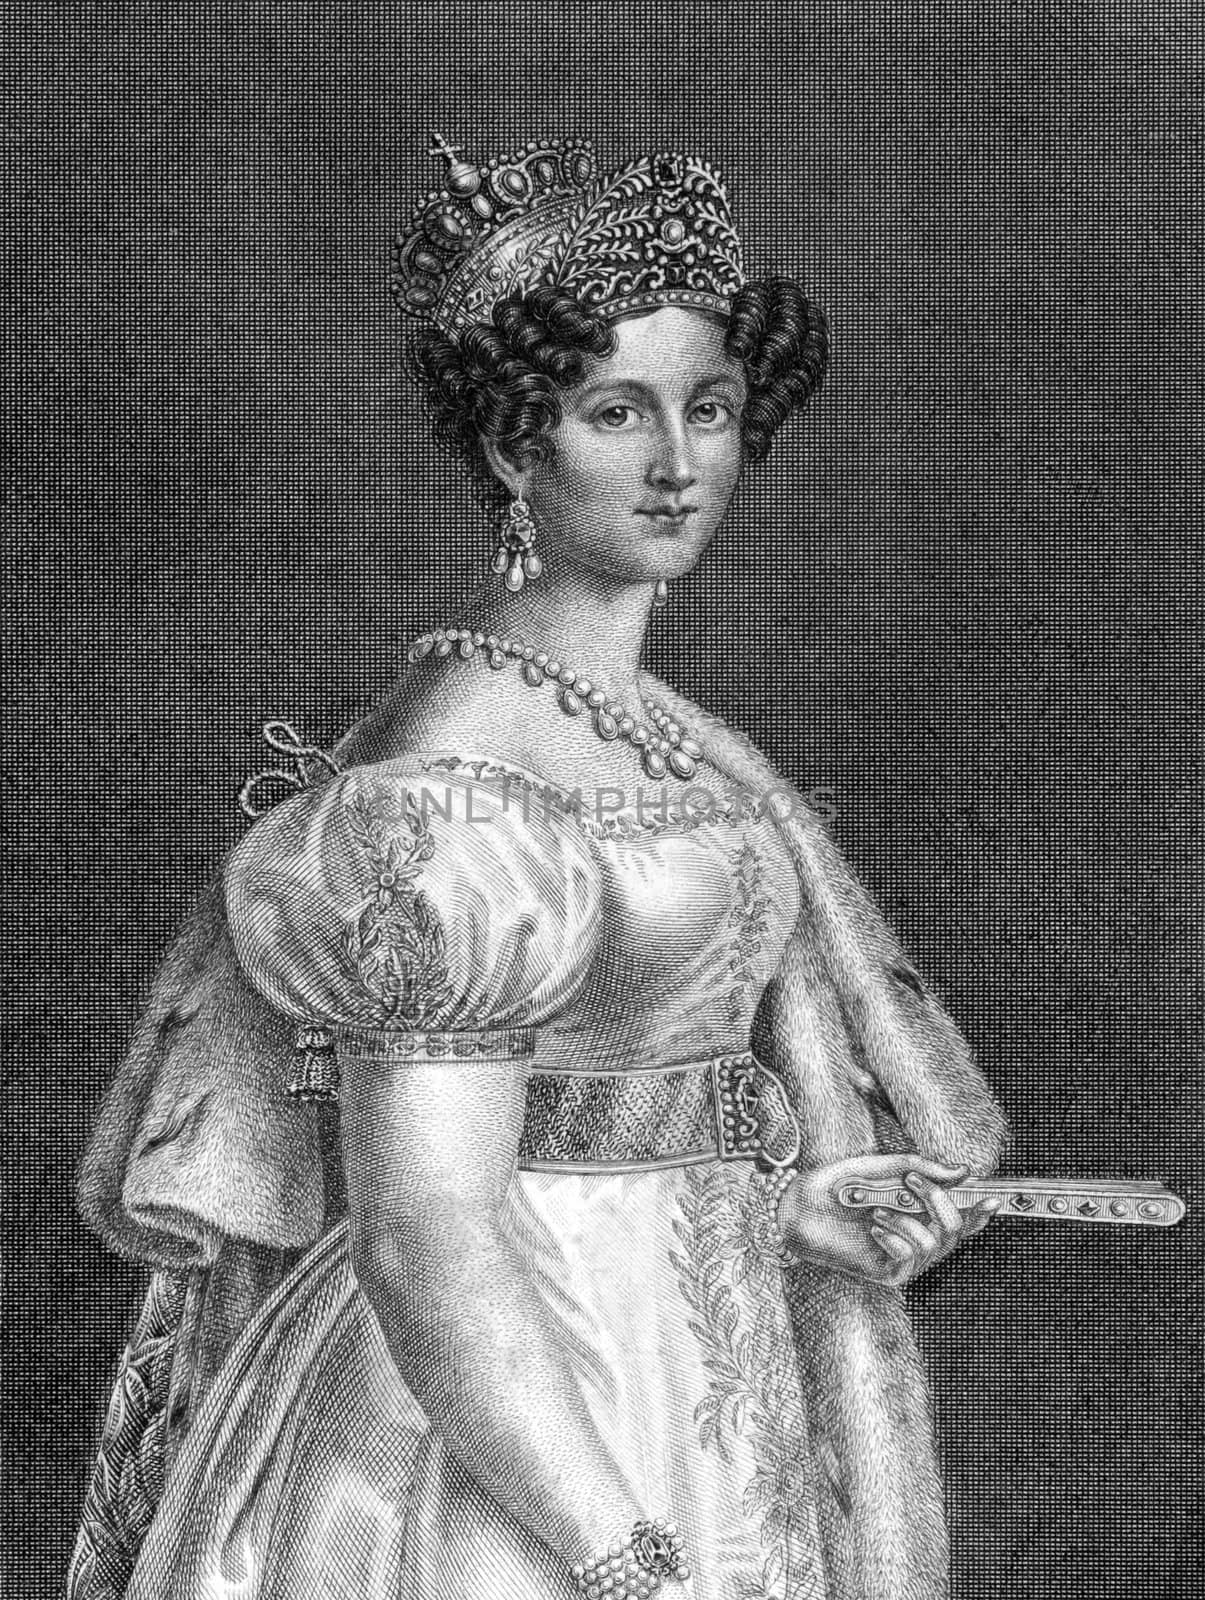 Therese of Saxe-Hildburghausen by Georgios